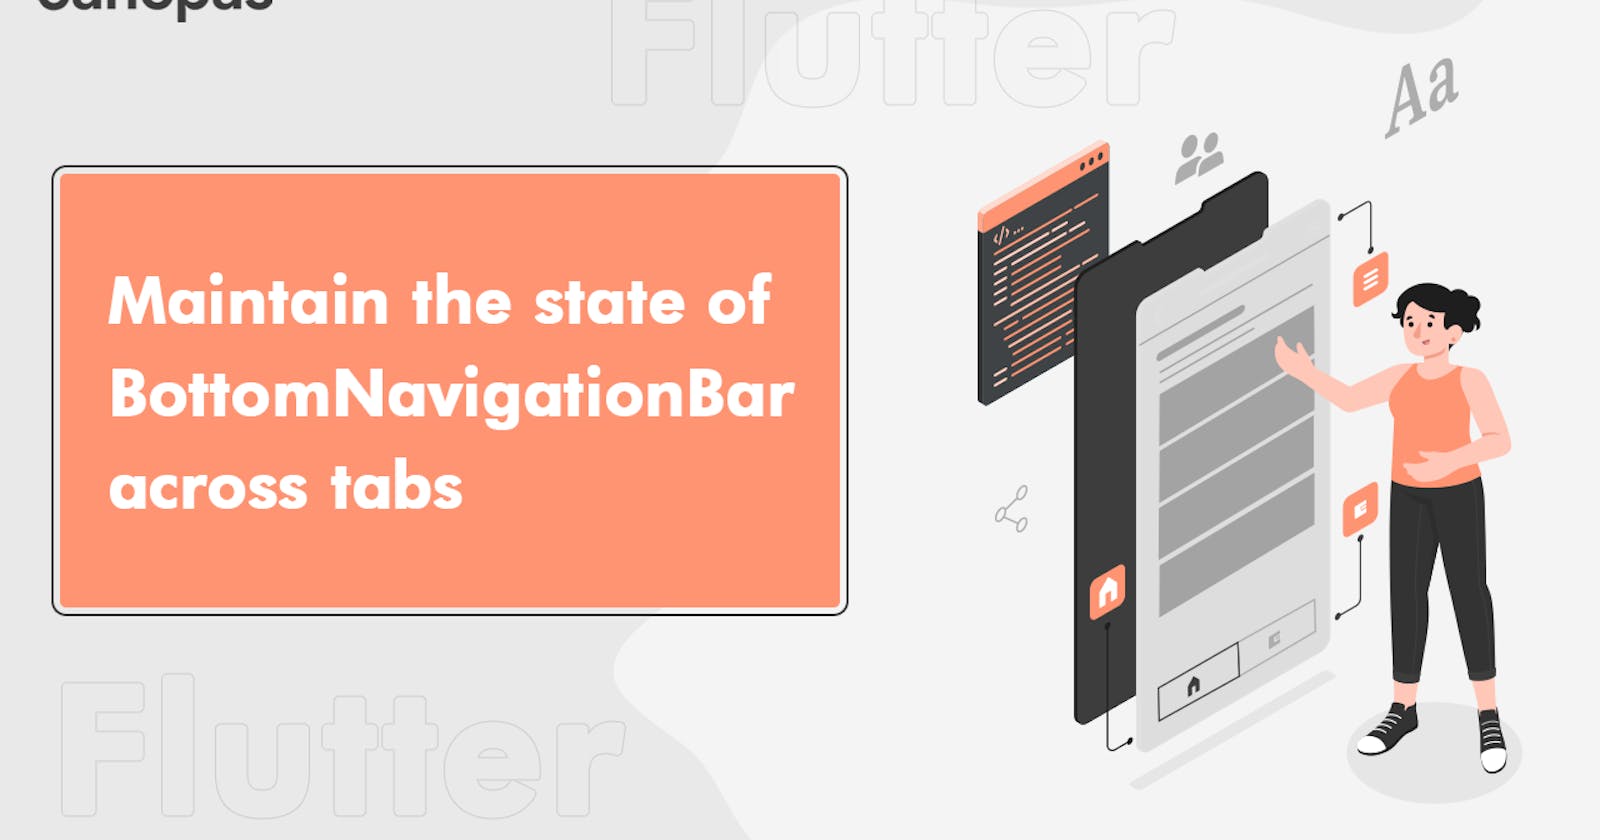 How to Maintain the state of BottomNavigationBar across tabs in Flutter